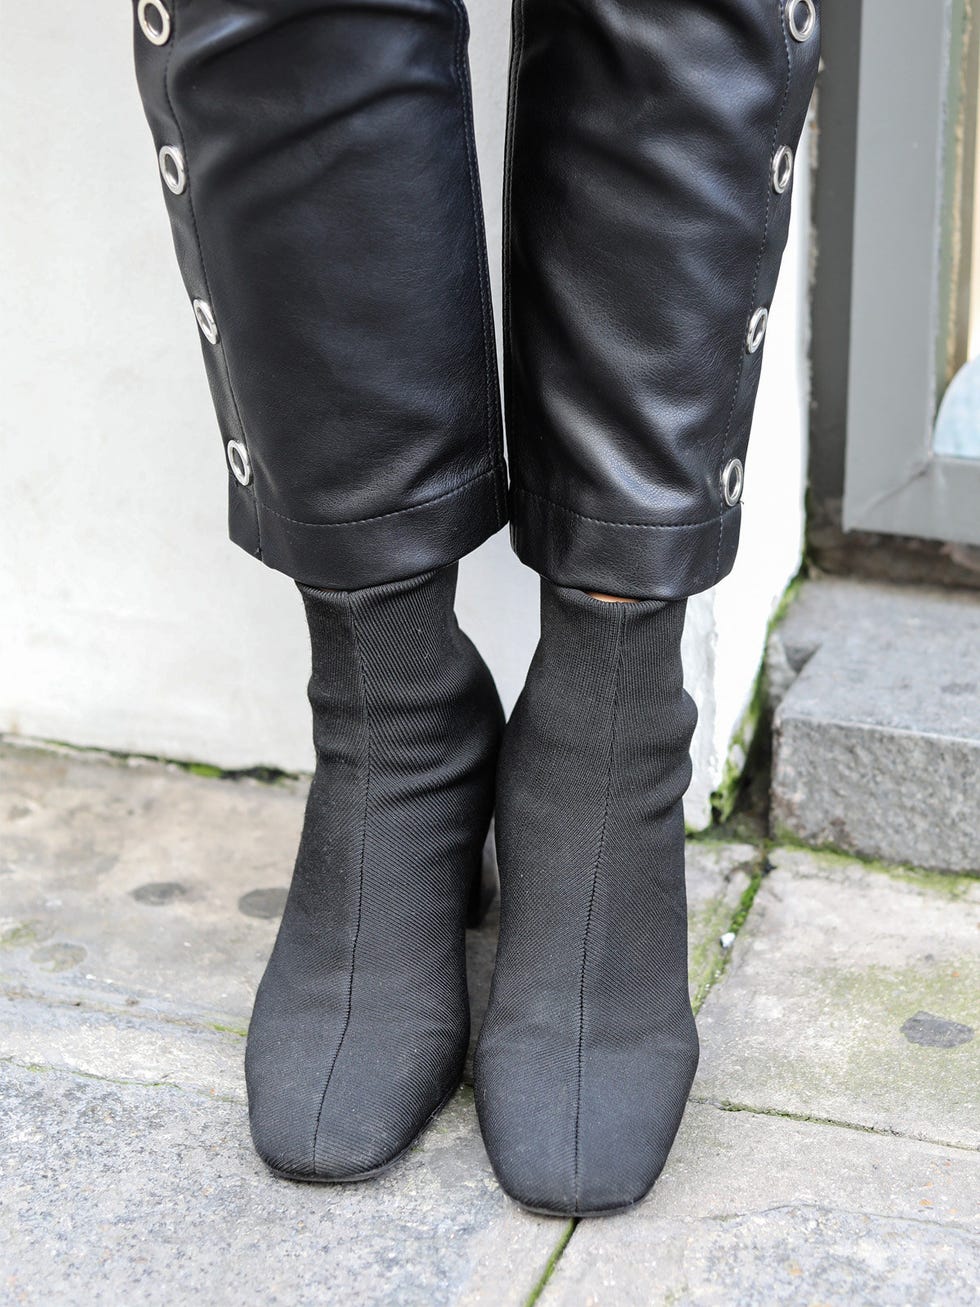 Textile, Boot, Style, Fashion, Knee-high boot, Black, Leather, Curtain, Costume accessory, Fashion design, 